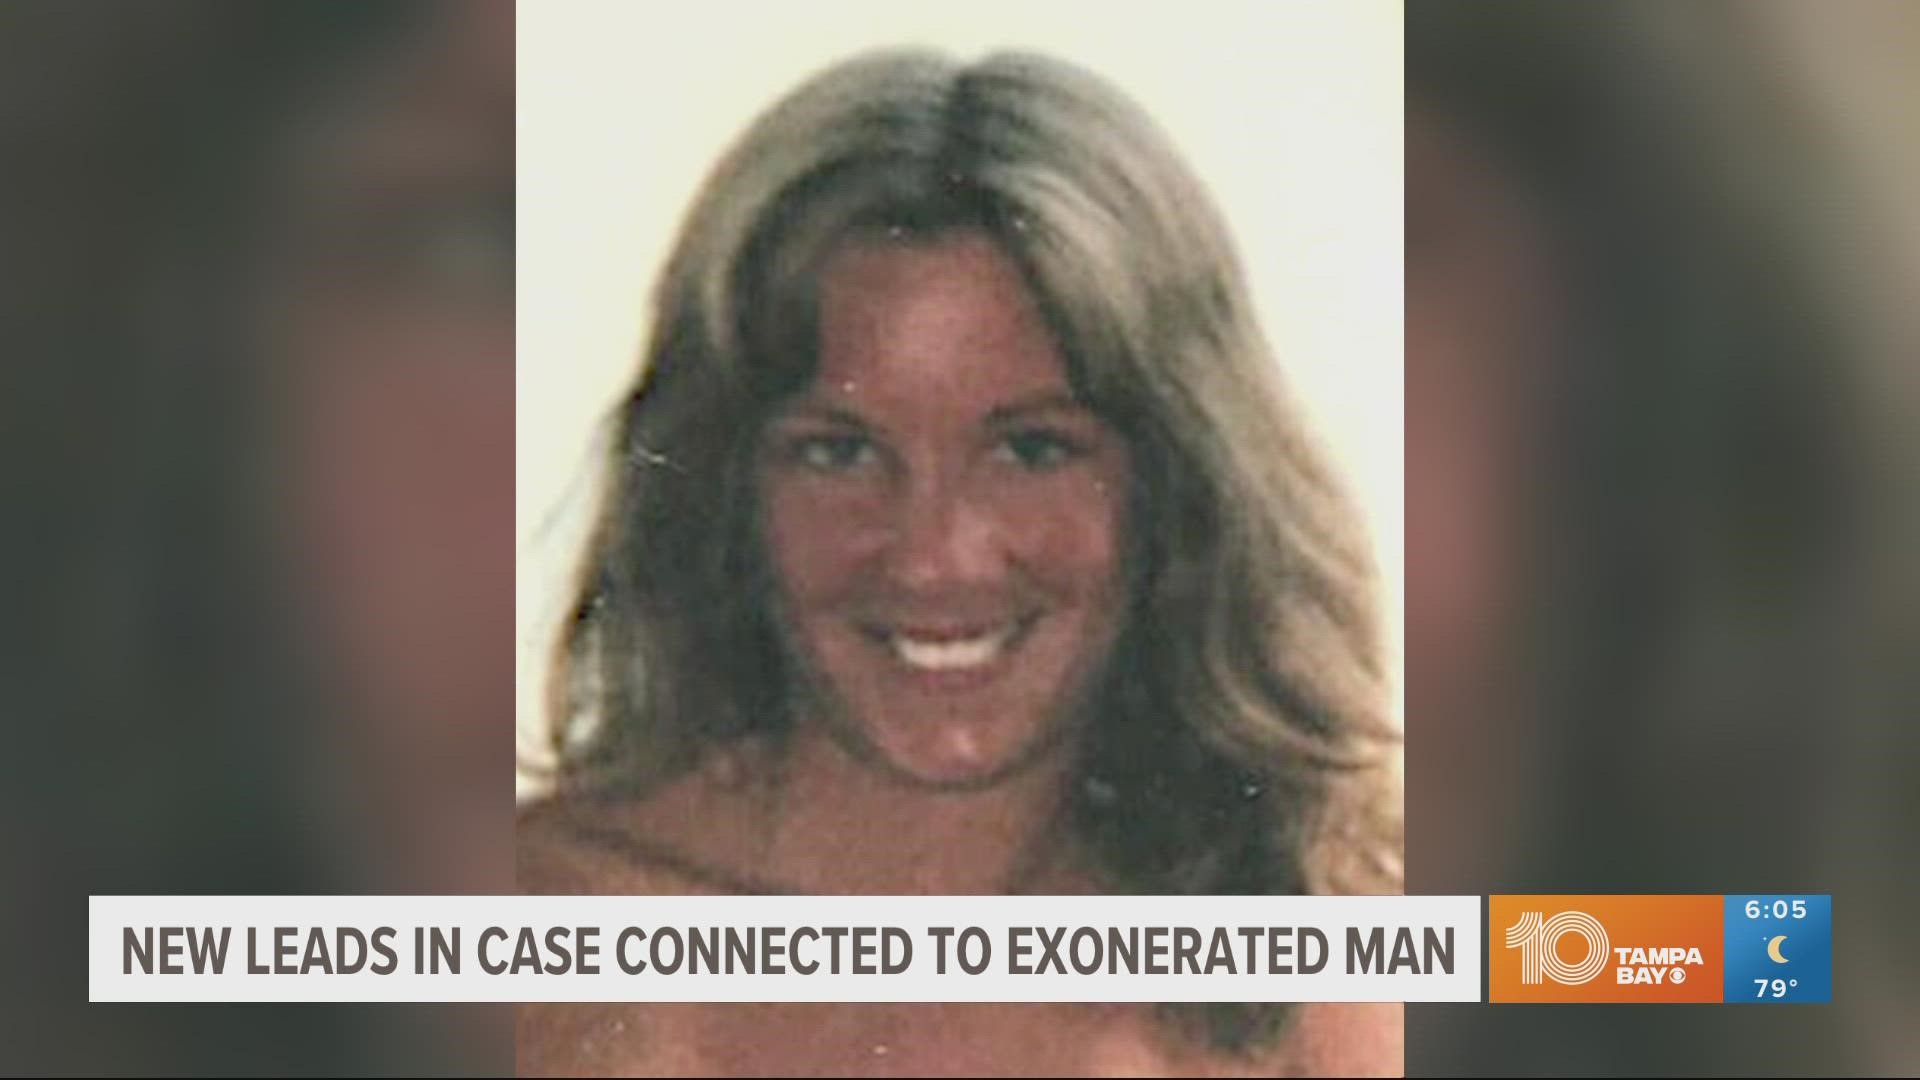 Robert DuBoise was exonerated in 2020 after DNA evidence found that he did not kill 19-year-old Barbara Grams.